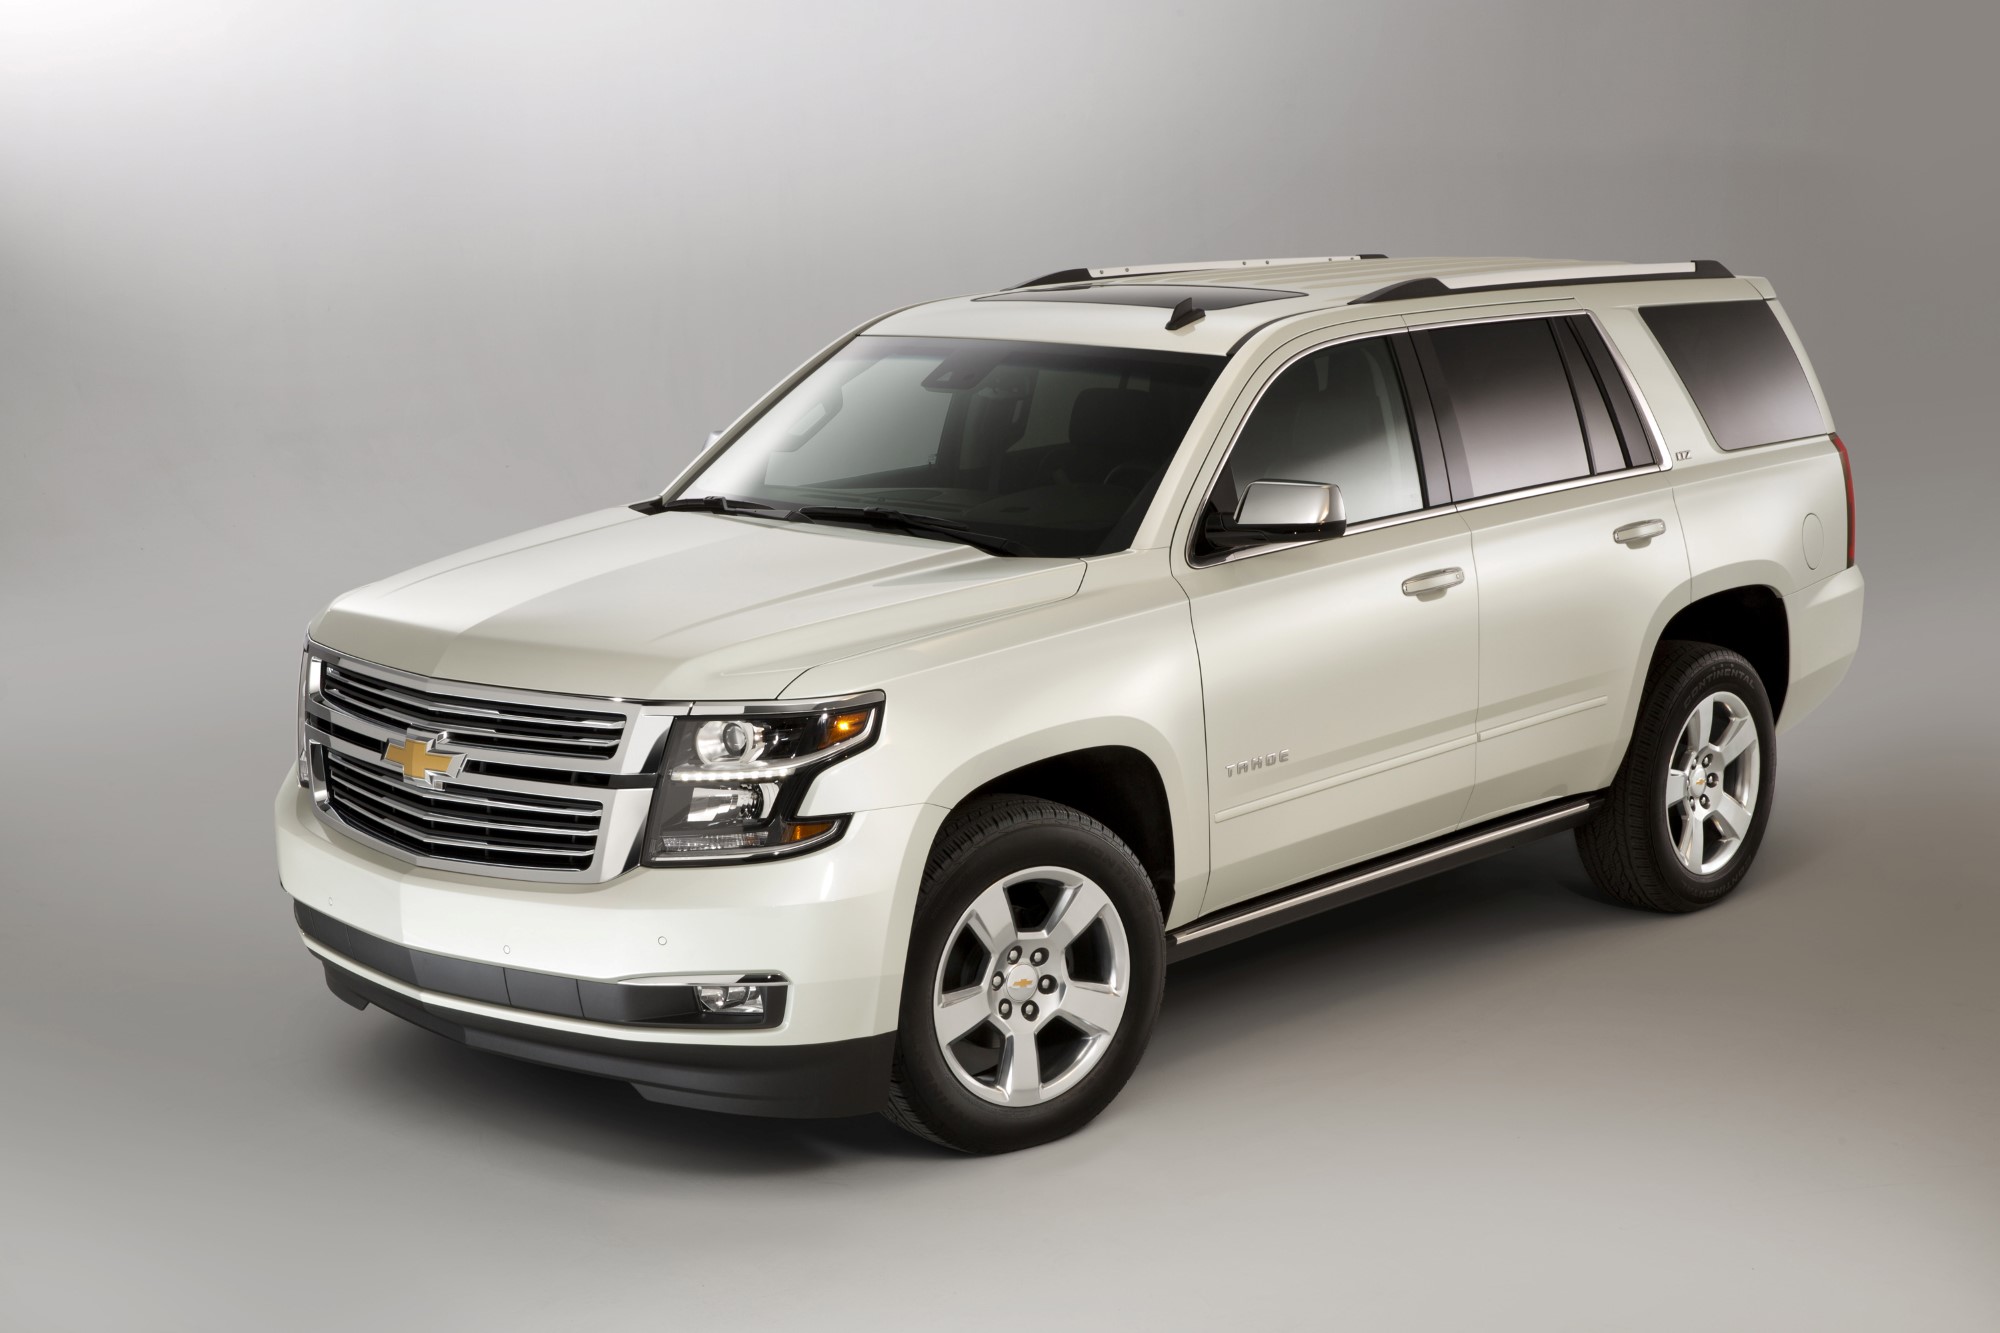 2015 Chevrolet Tahoe (Chevy) Review, Ratings, Specs, Prices, and Photos -  The Car Connection